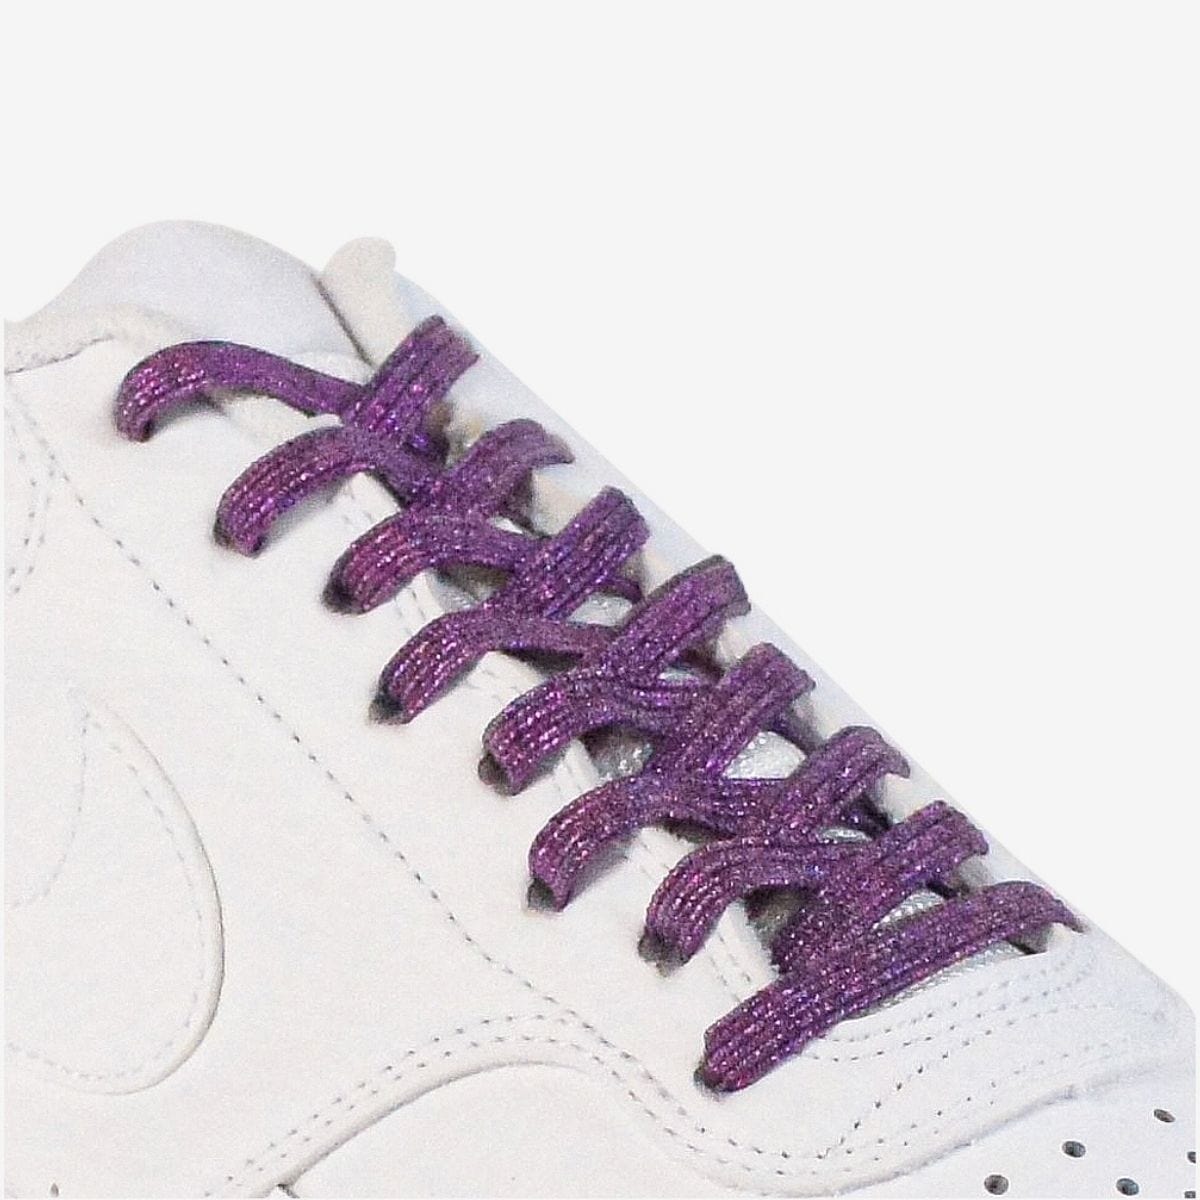 different-ways-to-lace-shoes-with-purple-elastic-shoelaces-on-white-kicks